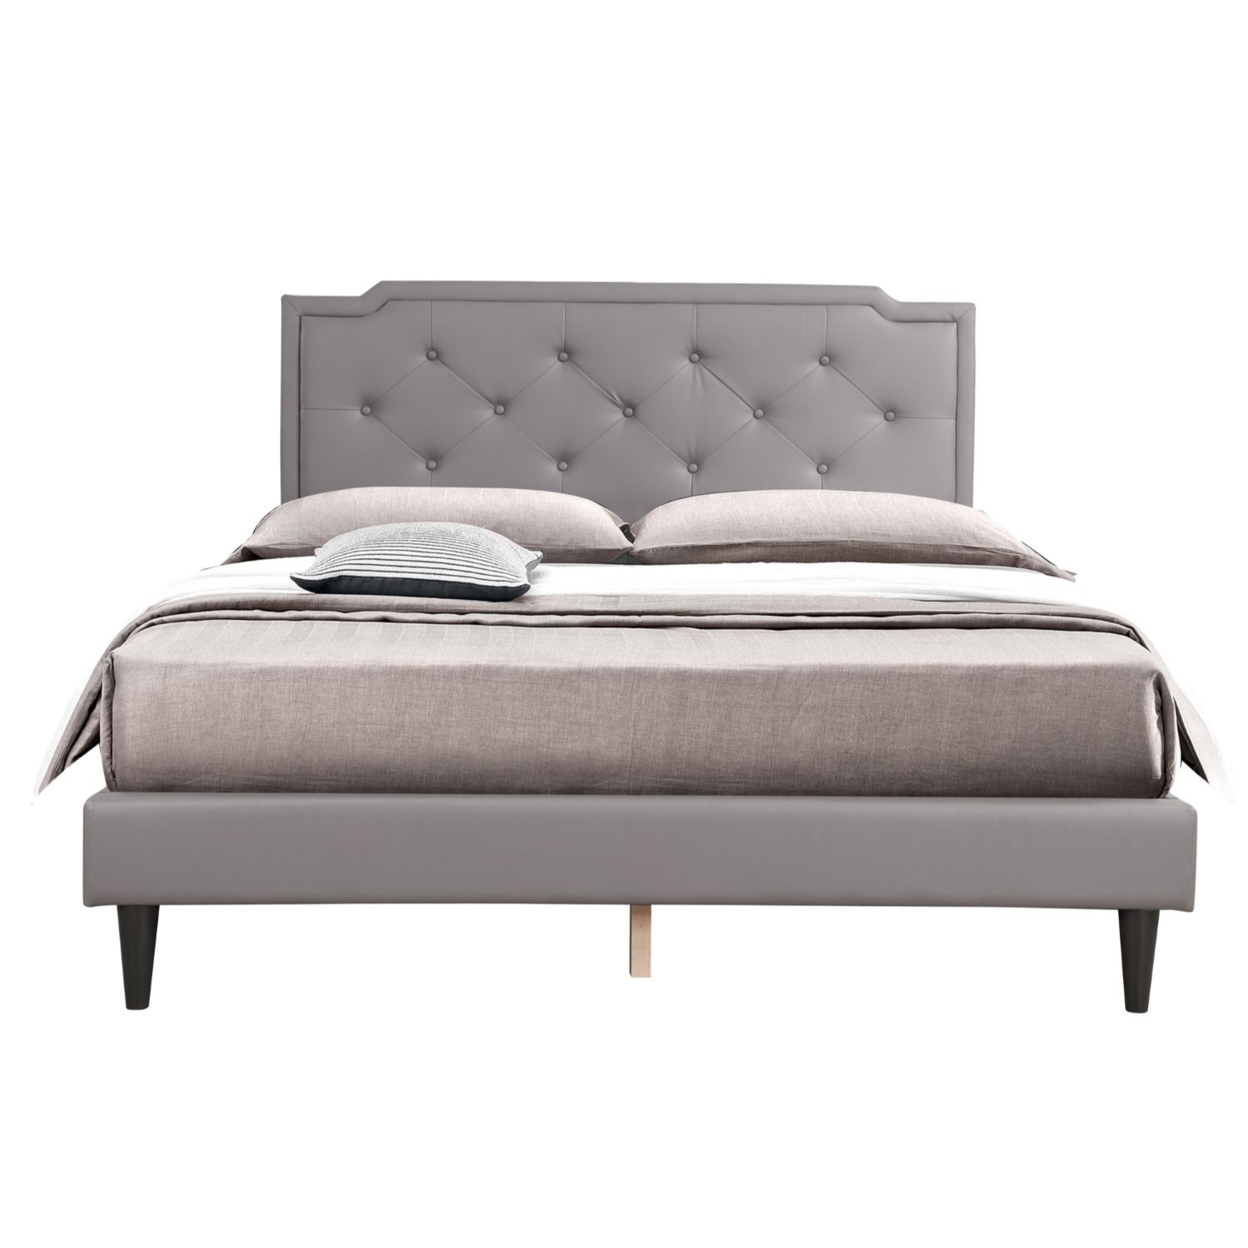 Home Furnitue Deb Light Grey Full Adjustable Panel Bed - image 2 of 5